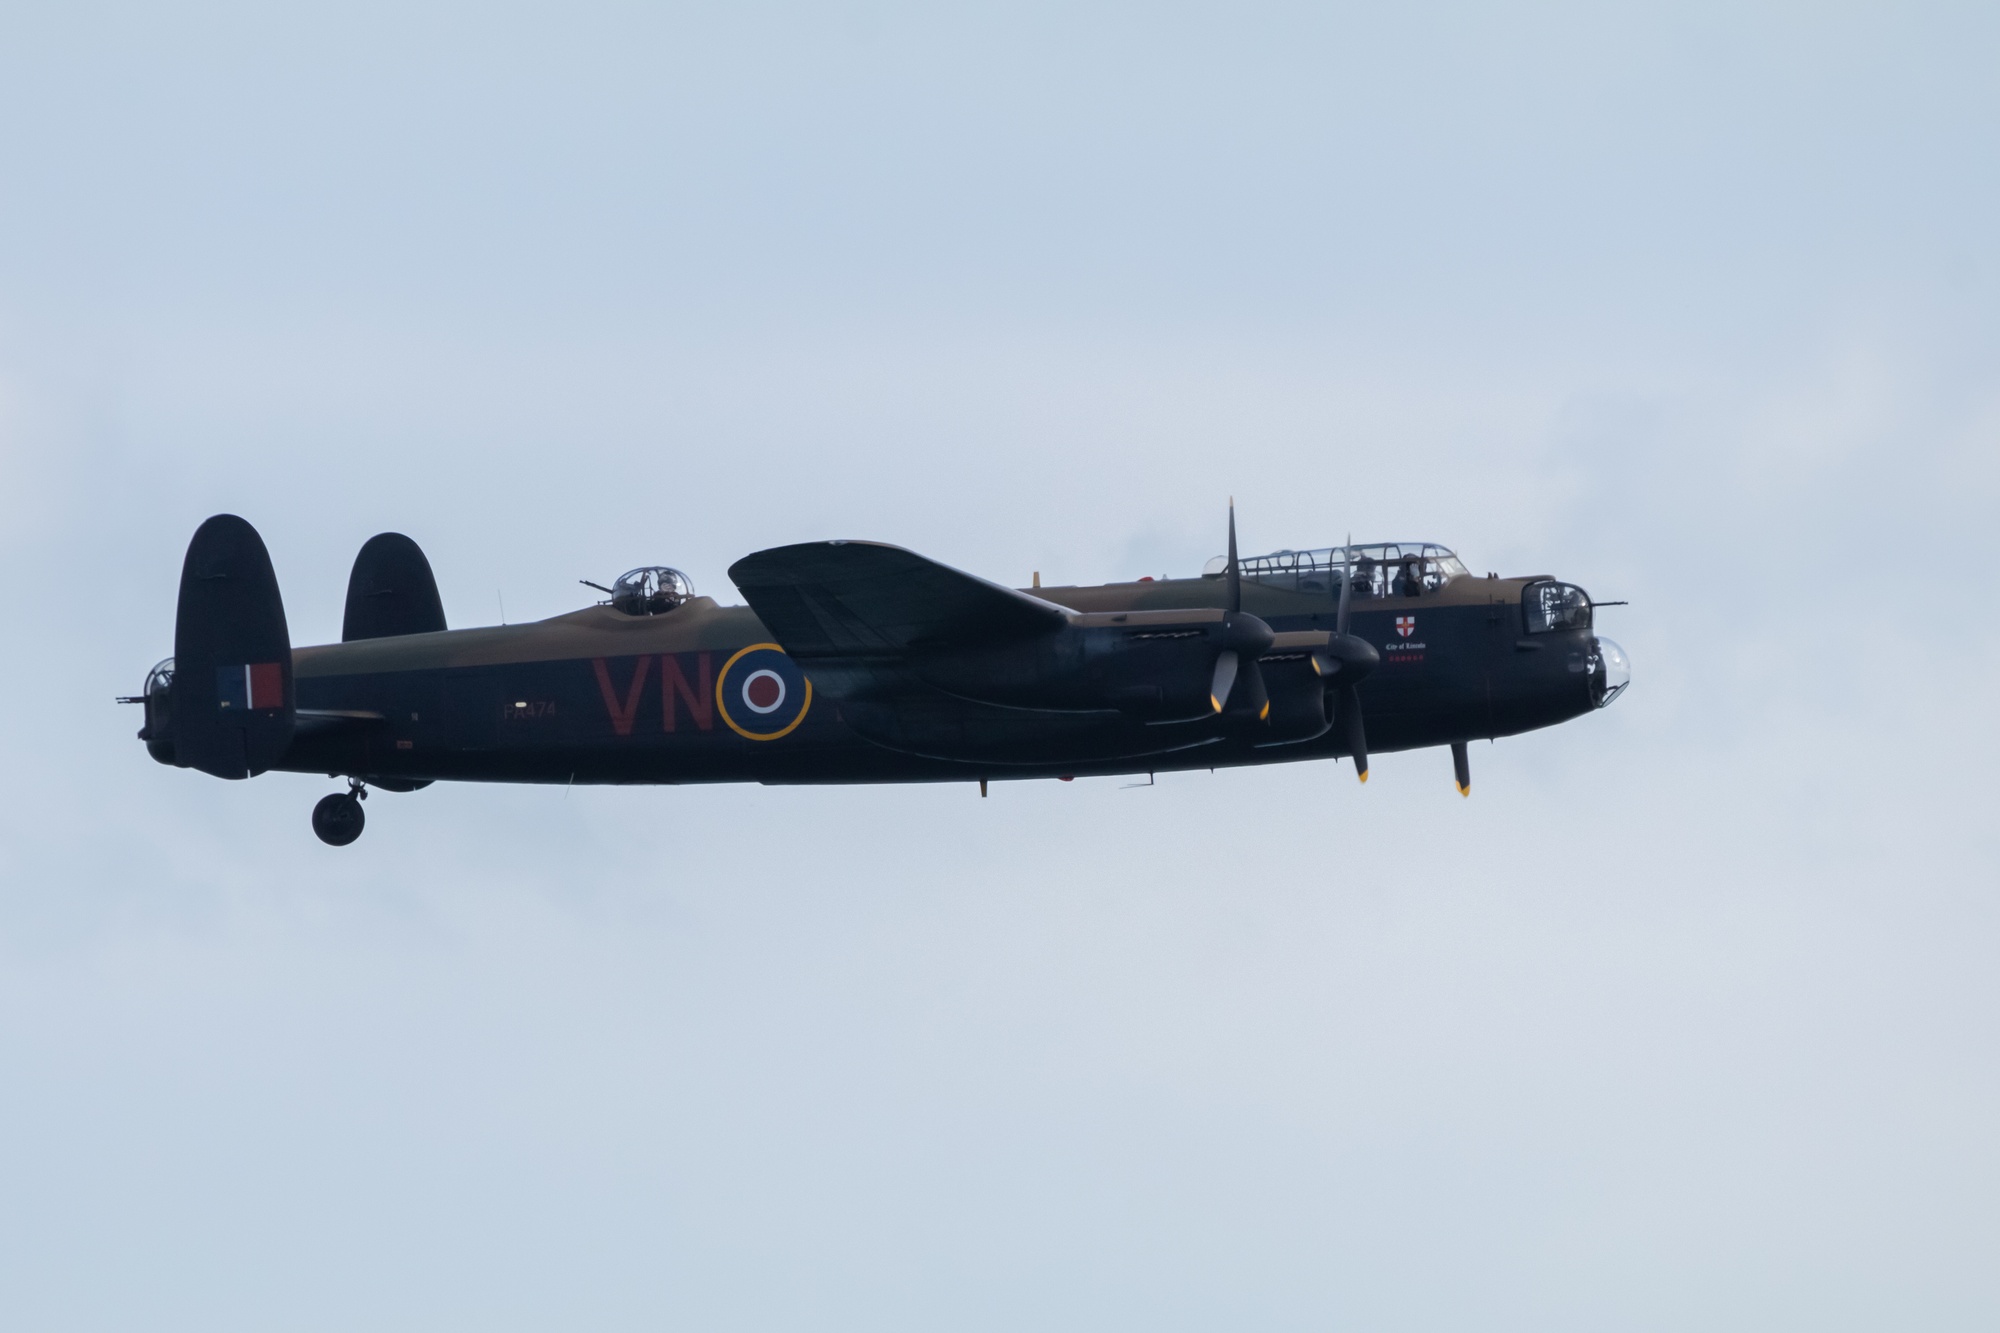 Lancaster bomber dipping its wings towards the camera allowing for a side profile of the aircraft. All cockpits are manned.